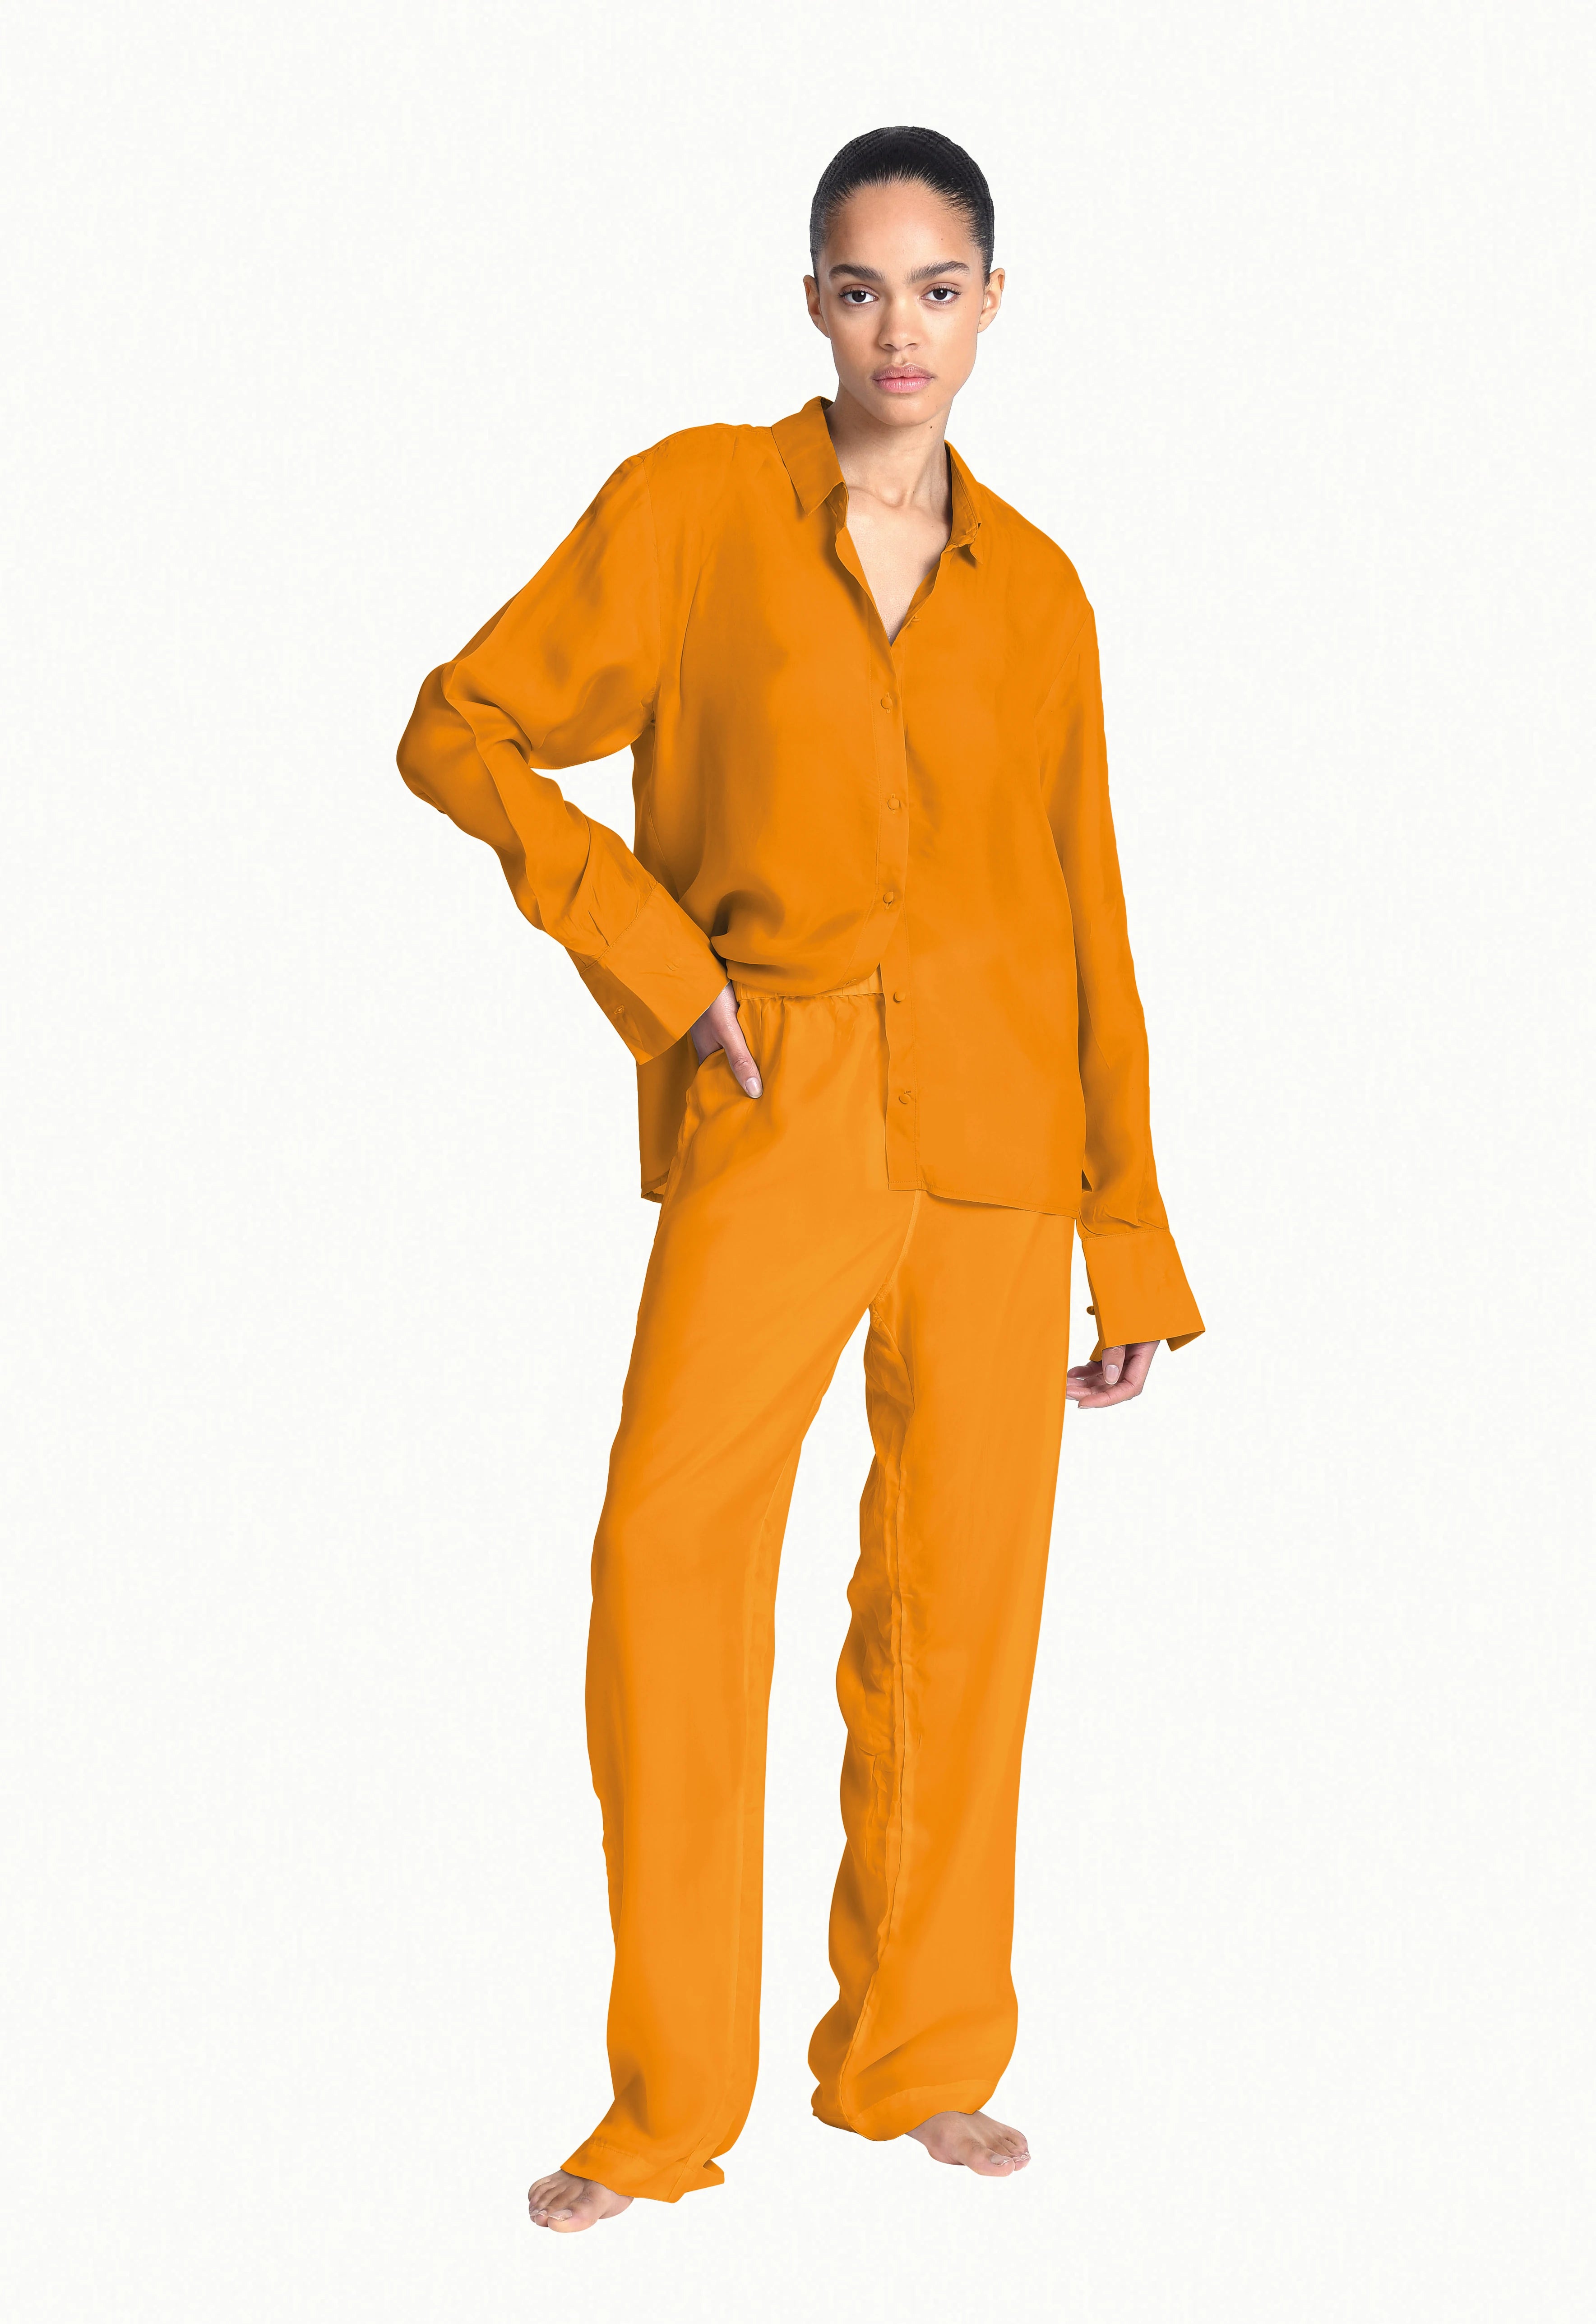 SOFT TOUCH HIGH RISE TROUSERS ORANGE